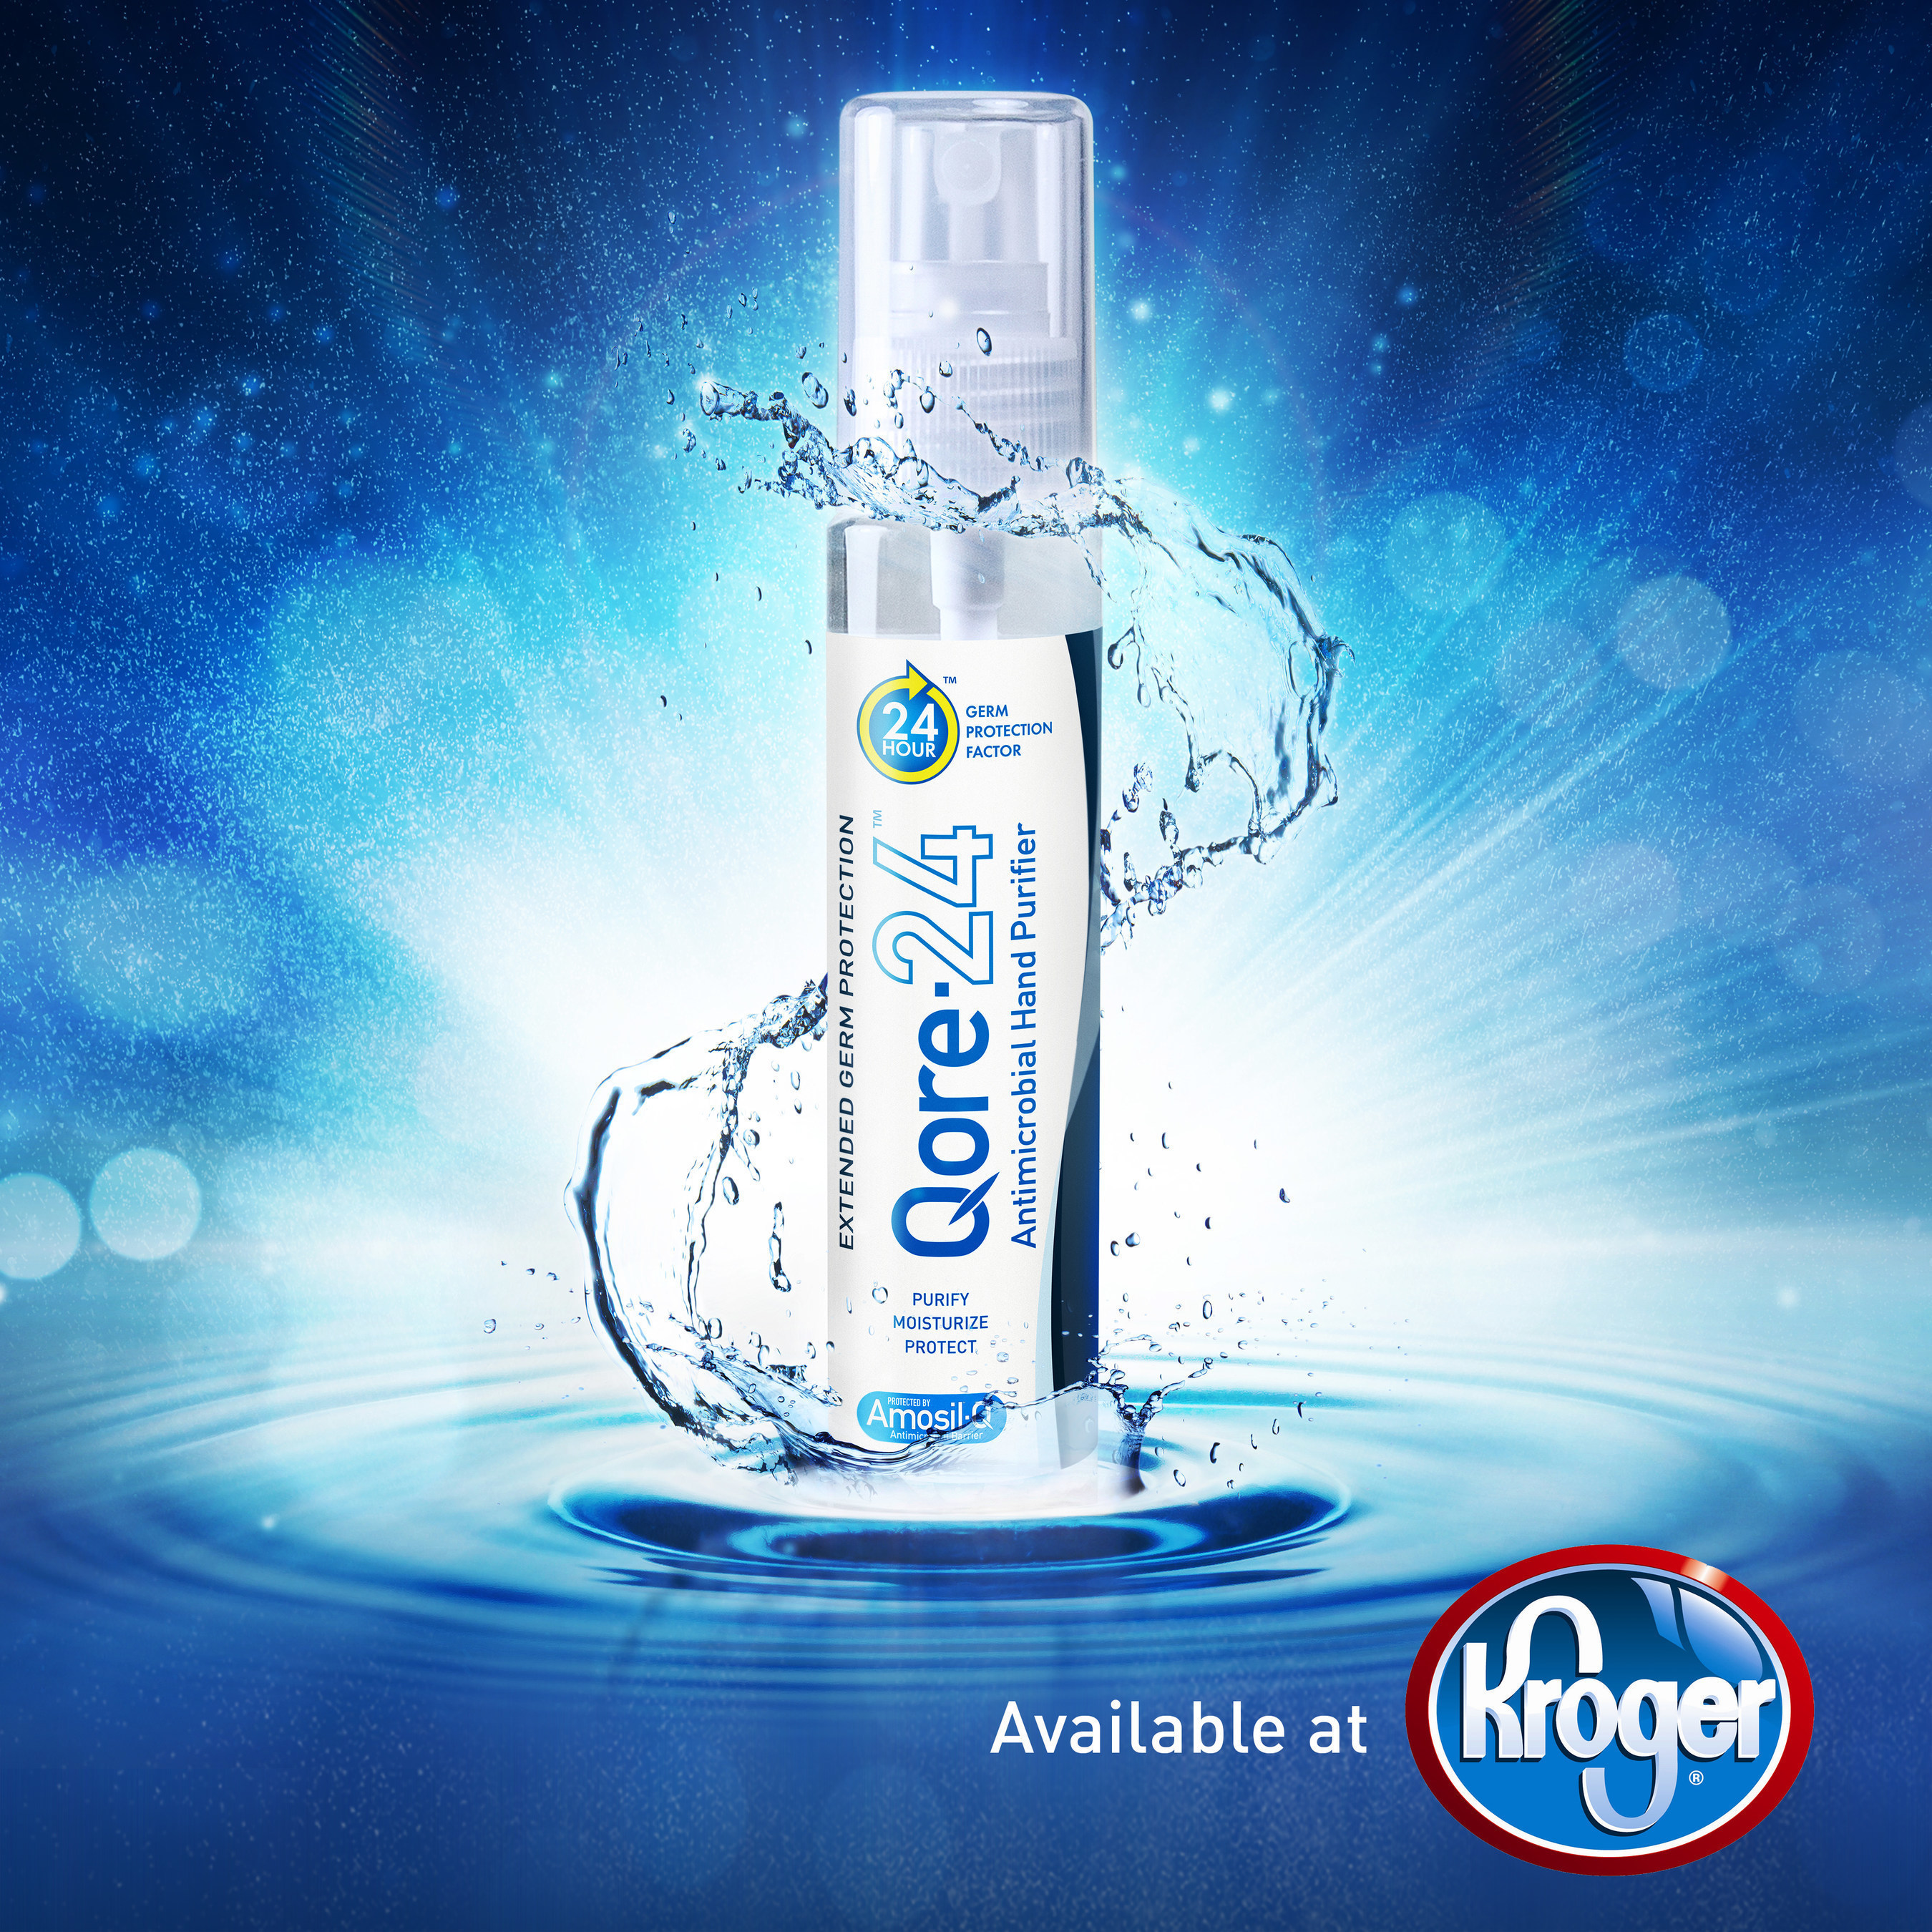 Qore-24,  the world's only antimicrobial hand purifier, effectively killing germs for up to 24 hours, today announced it will be sold at all Kroger stores nationwide.